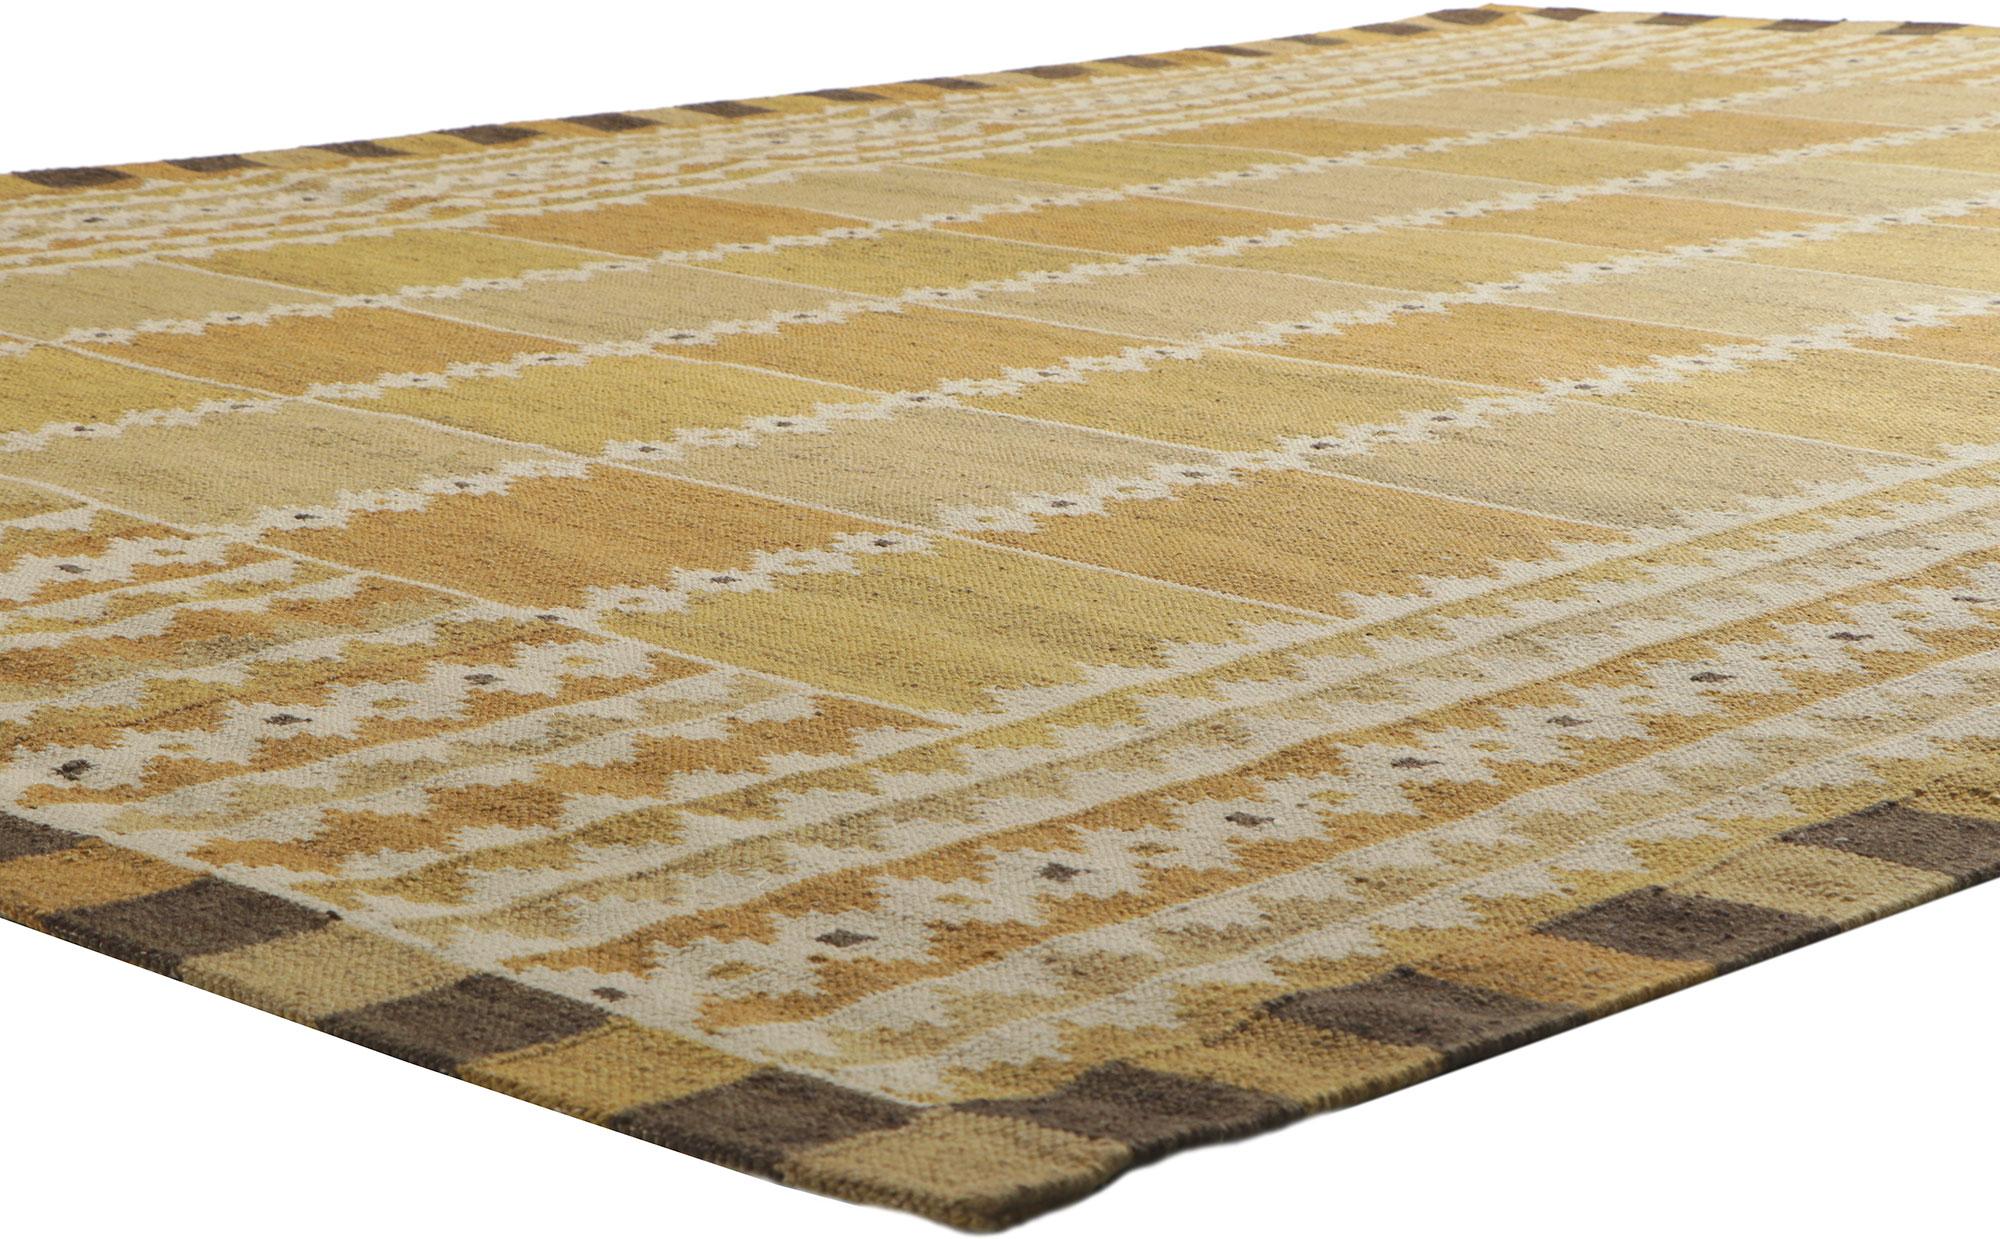 30800 New swedish style Kilim rug inspired by Marianne Richter 09'11 x 13'05. With its geometric design and bohemian hygge vibes, this hand-woven wool Swedish inspired Kilim rug beautifully embodies the simplicity of Scandinavian modern style. The